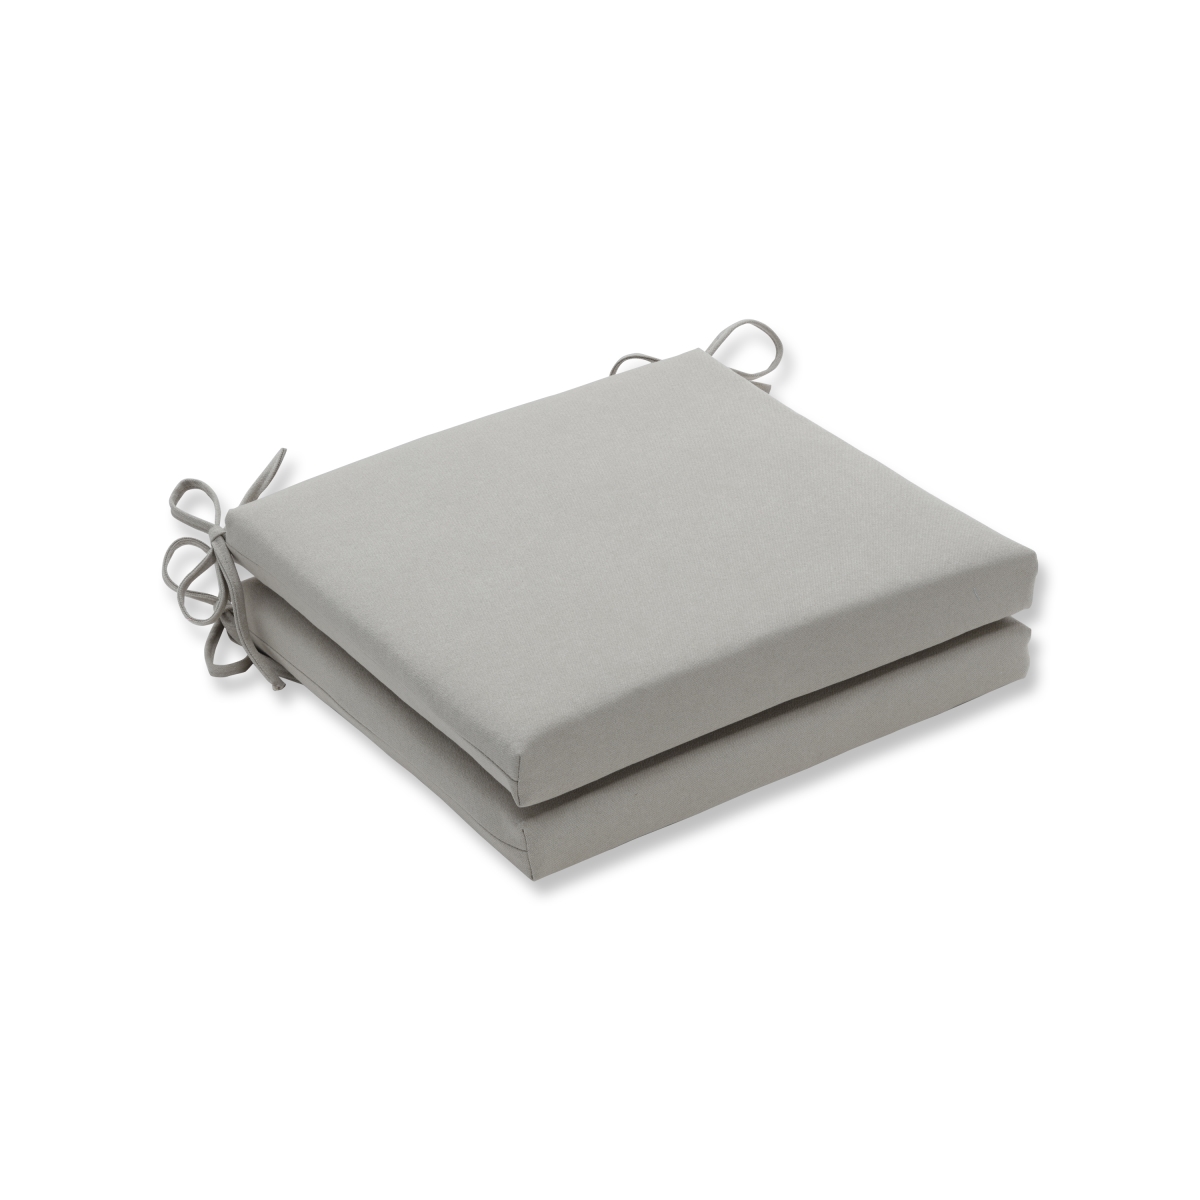 615011 20 X 20 X 3 In. Outdoor & Indoor Solar Linen Squared Corners Seat Cushion, Off-white - Set Of 2